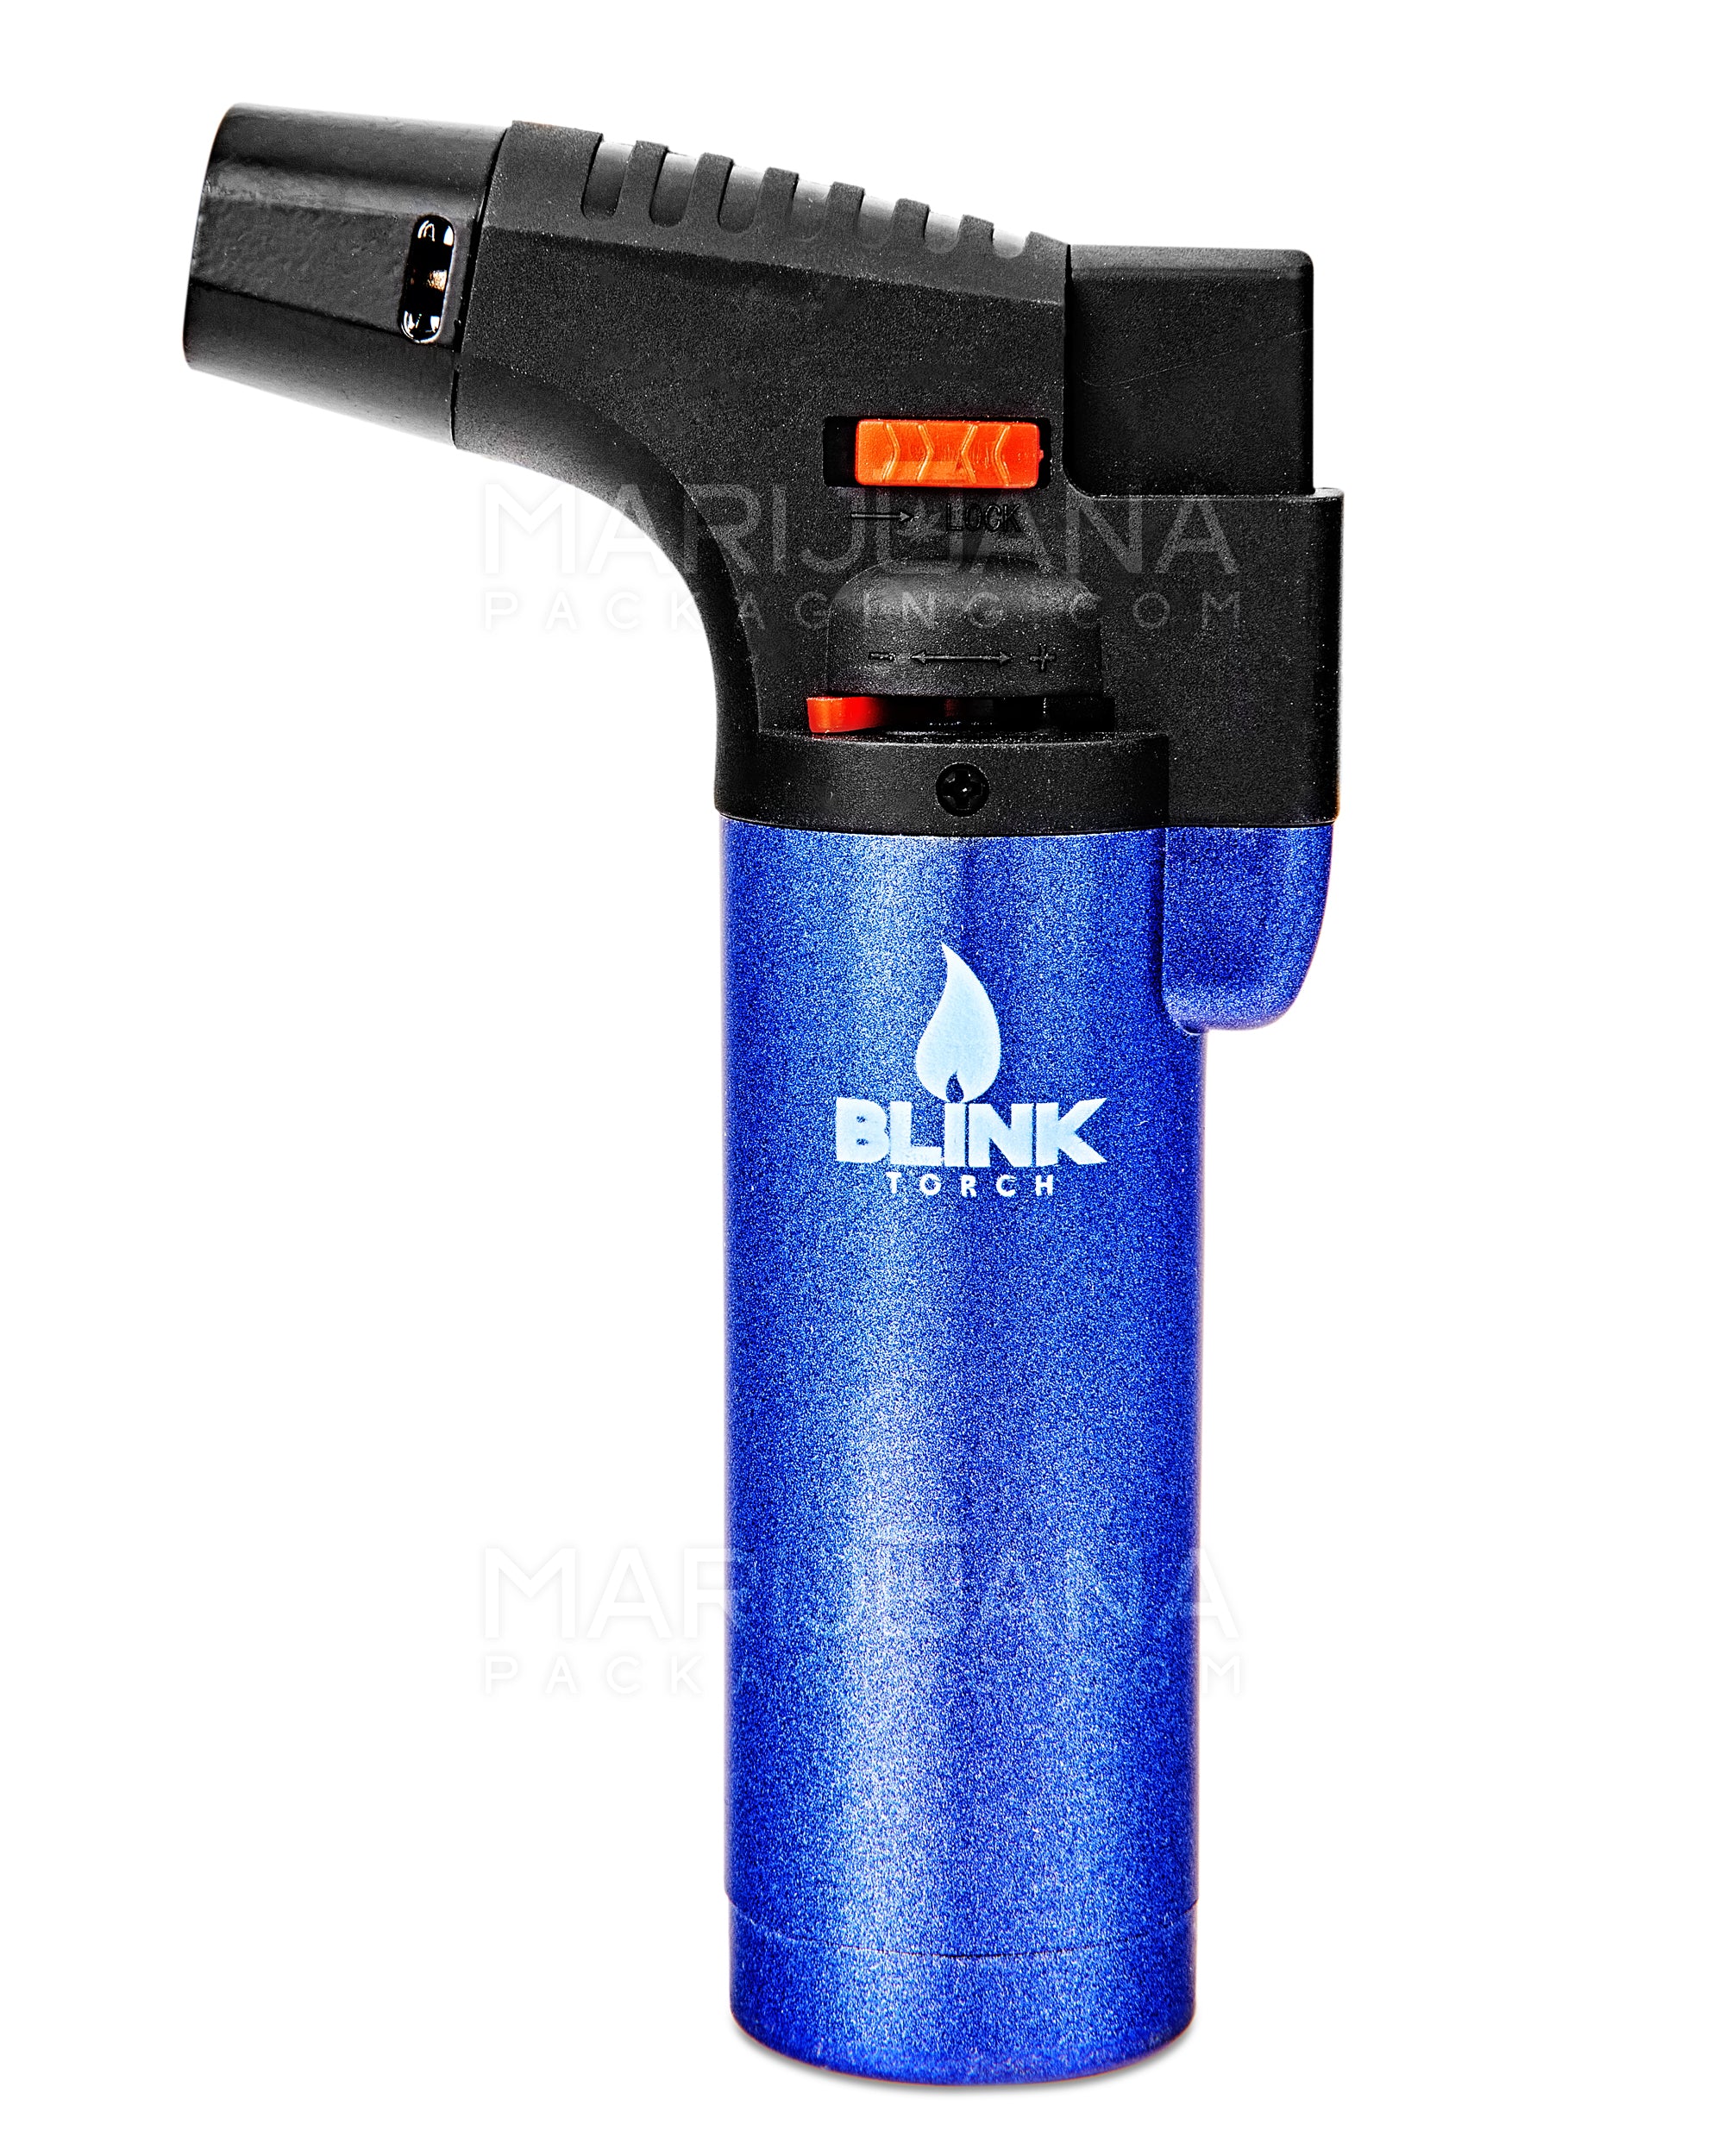 BLINK | Metal Torch w/ Safety Lock | 4.5in Tall - Butane - Assorted - 3